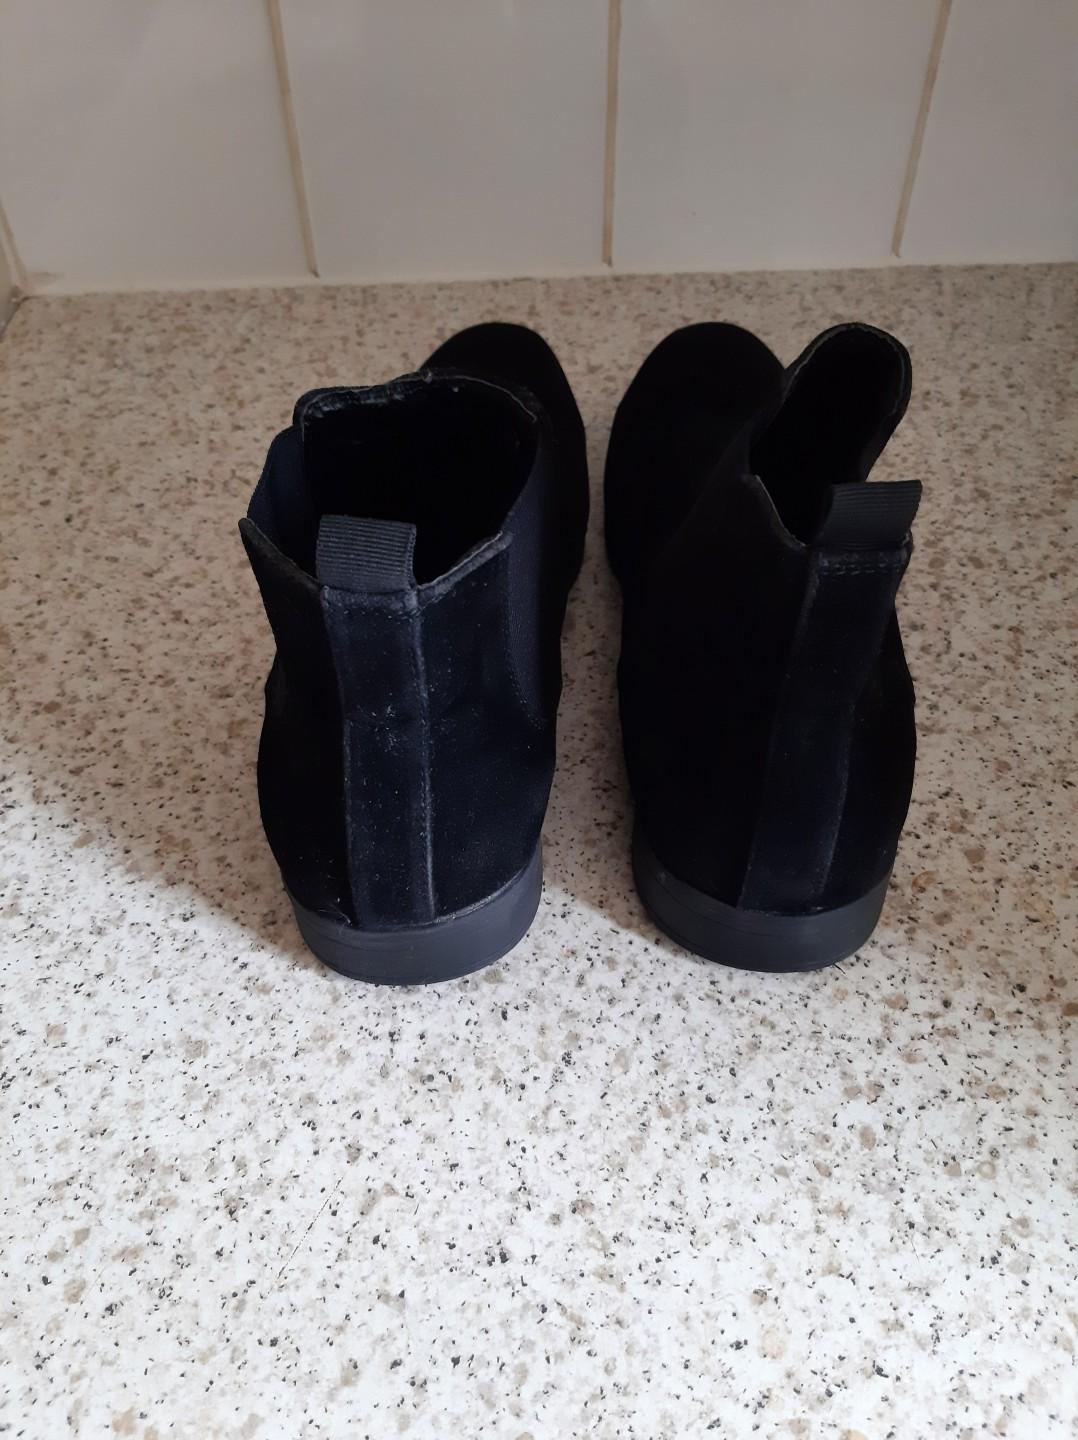 primark 145478 shoes in NW10 London for £10.00 for sale | Shpock